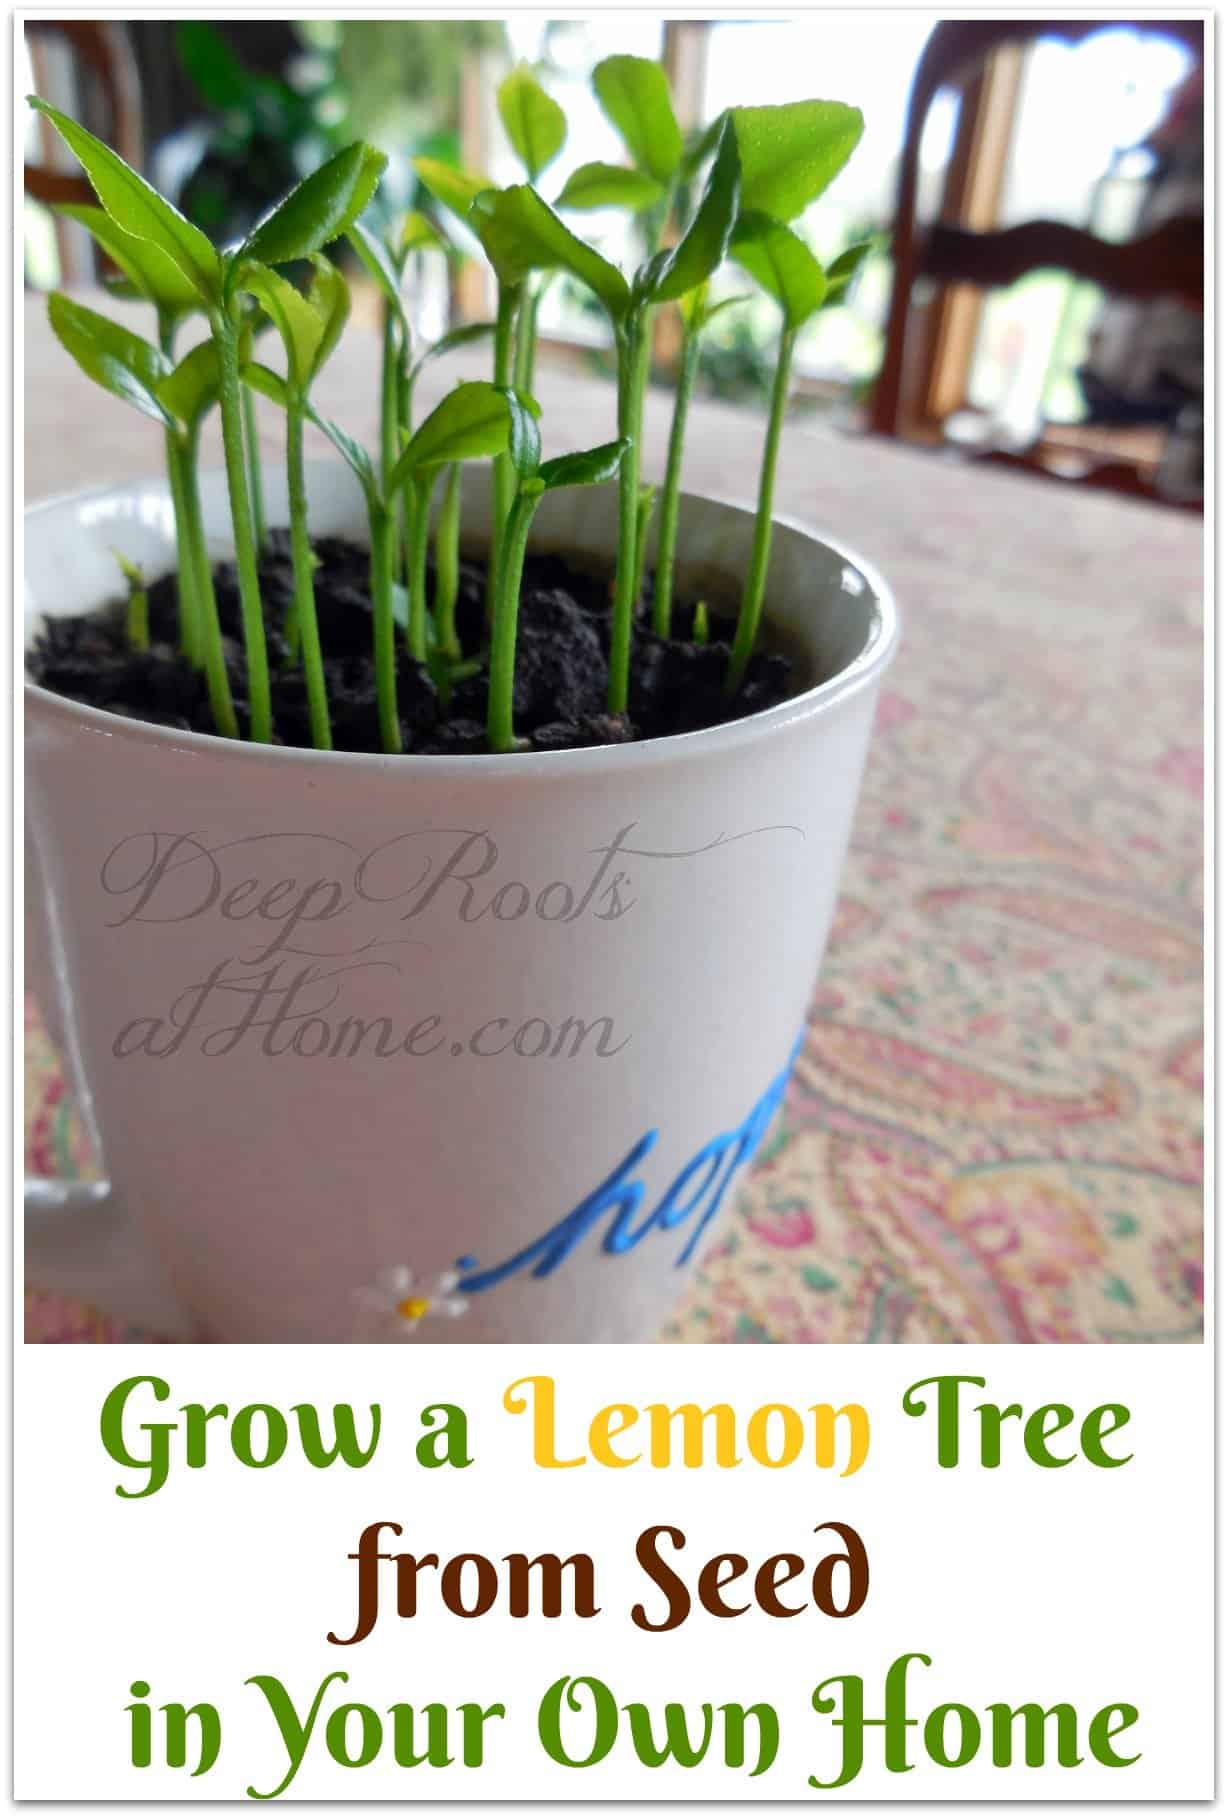 Grow a Lemon Tree from Seed in Your Own Home